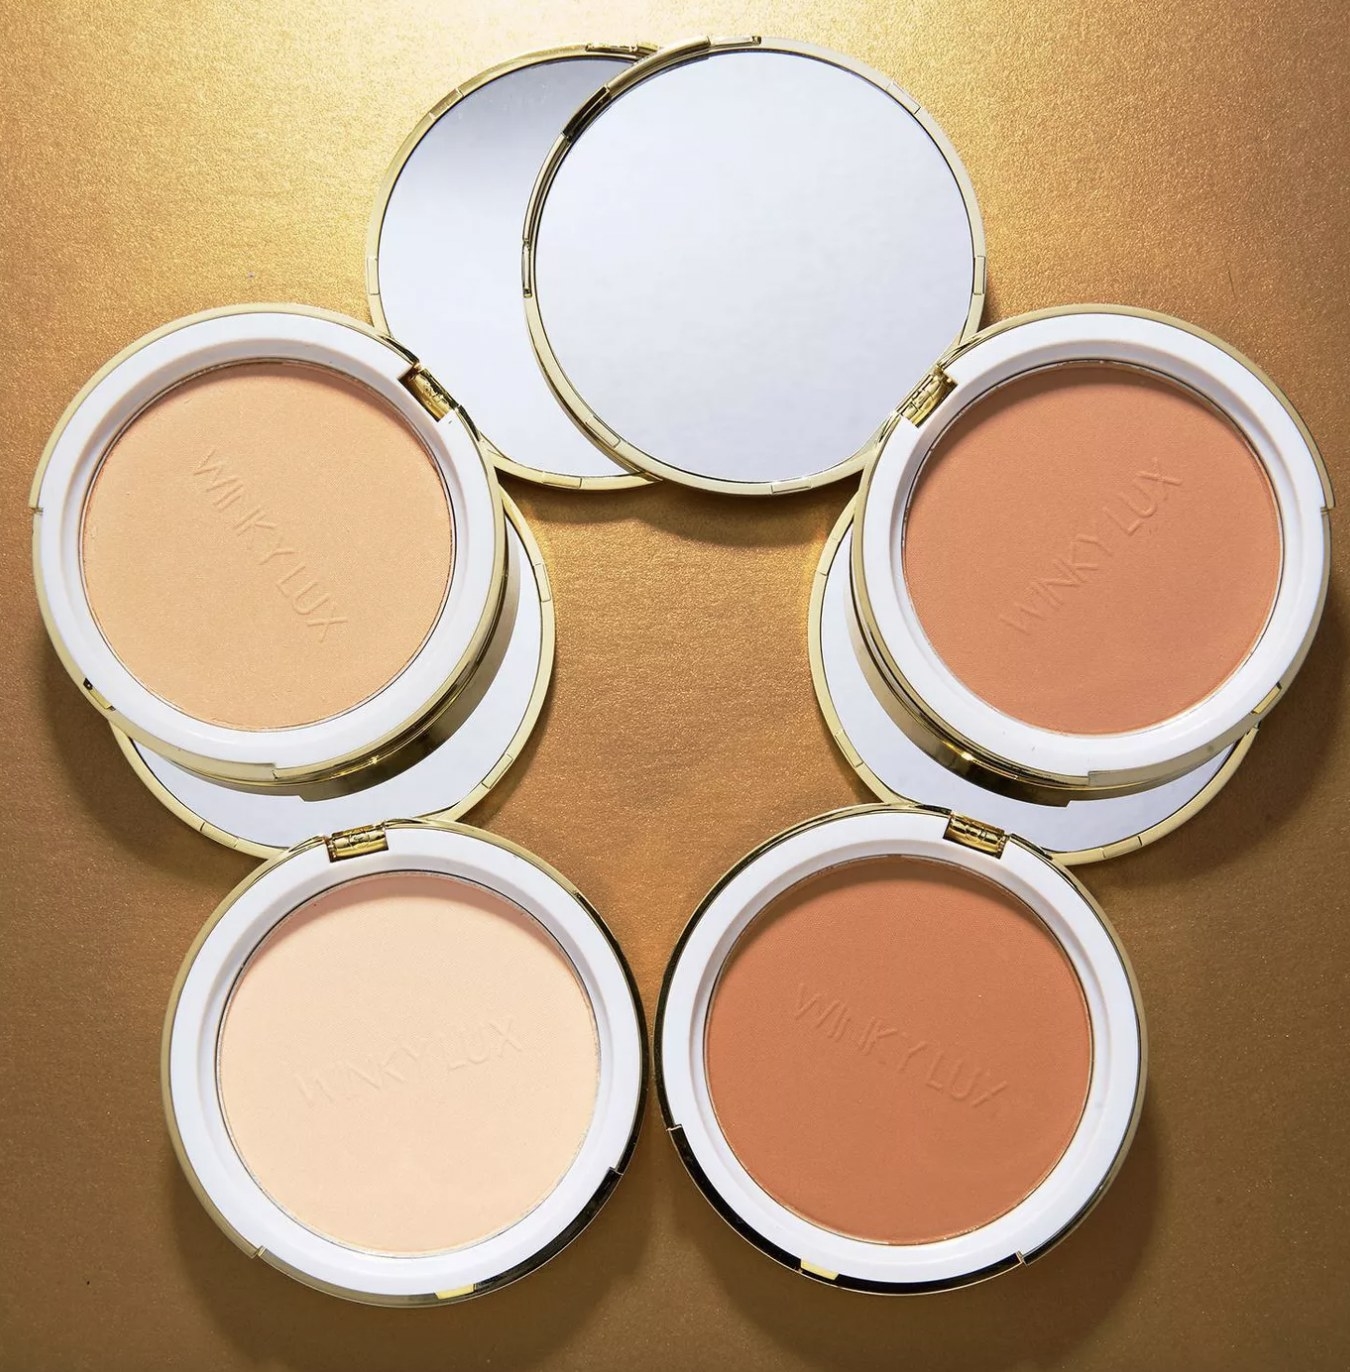 A variety of powder foundation compacts